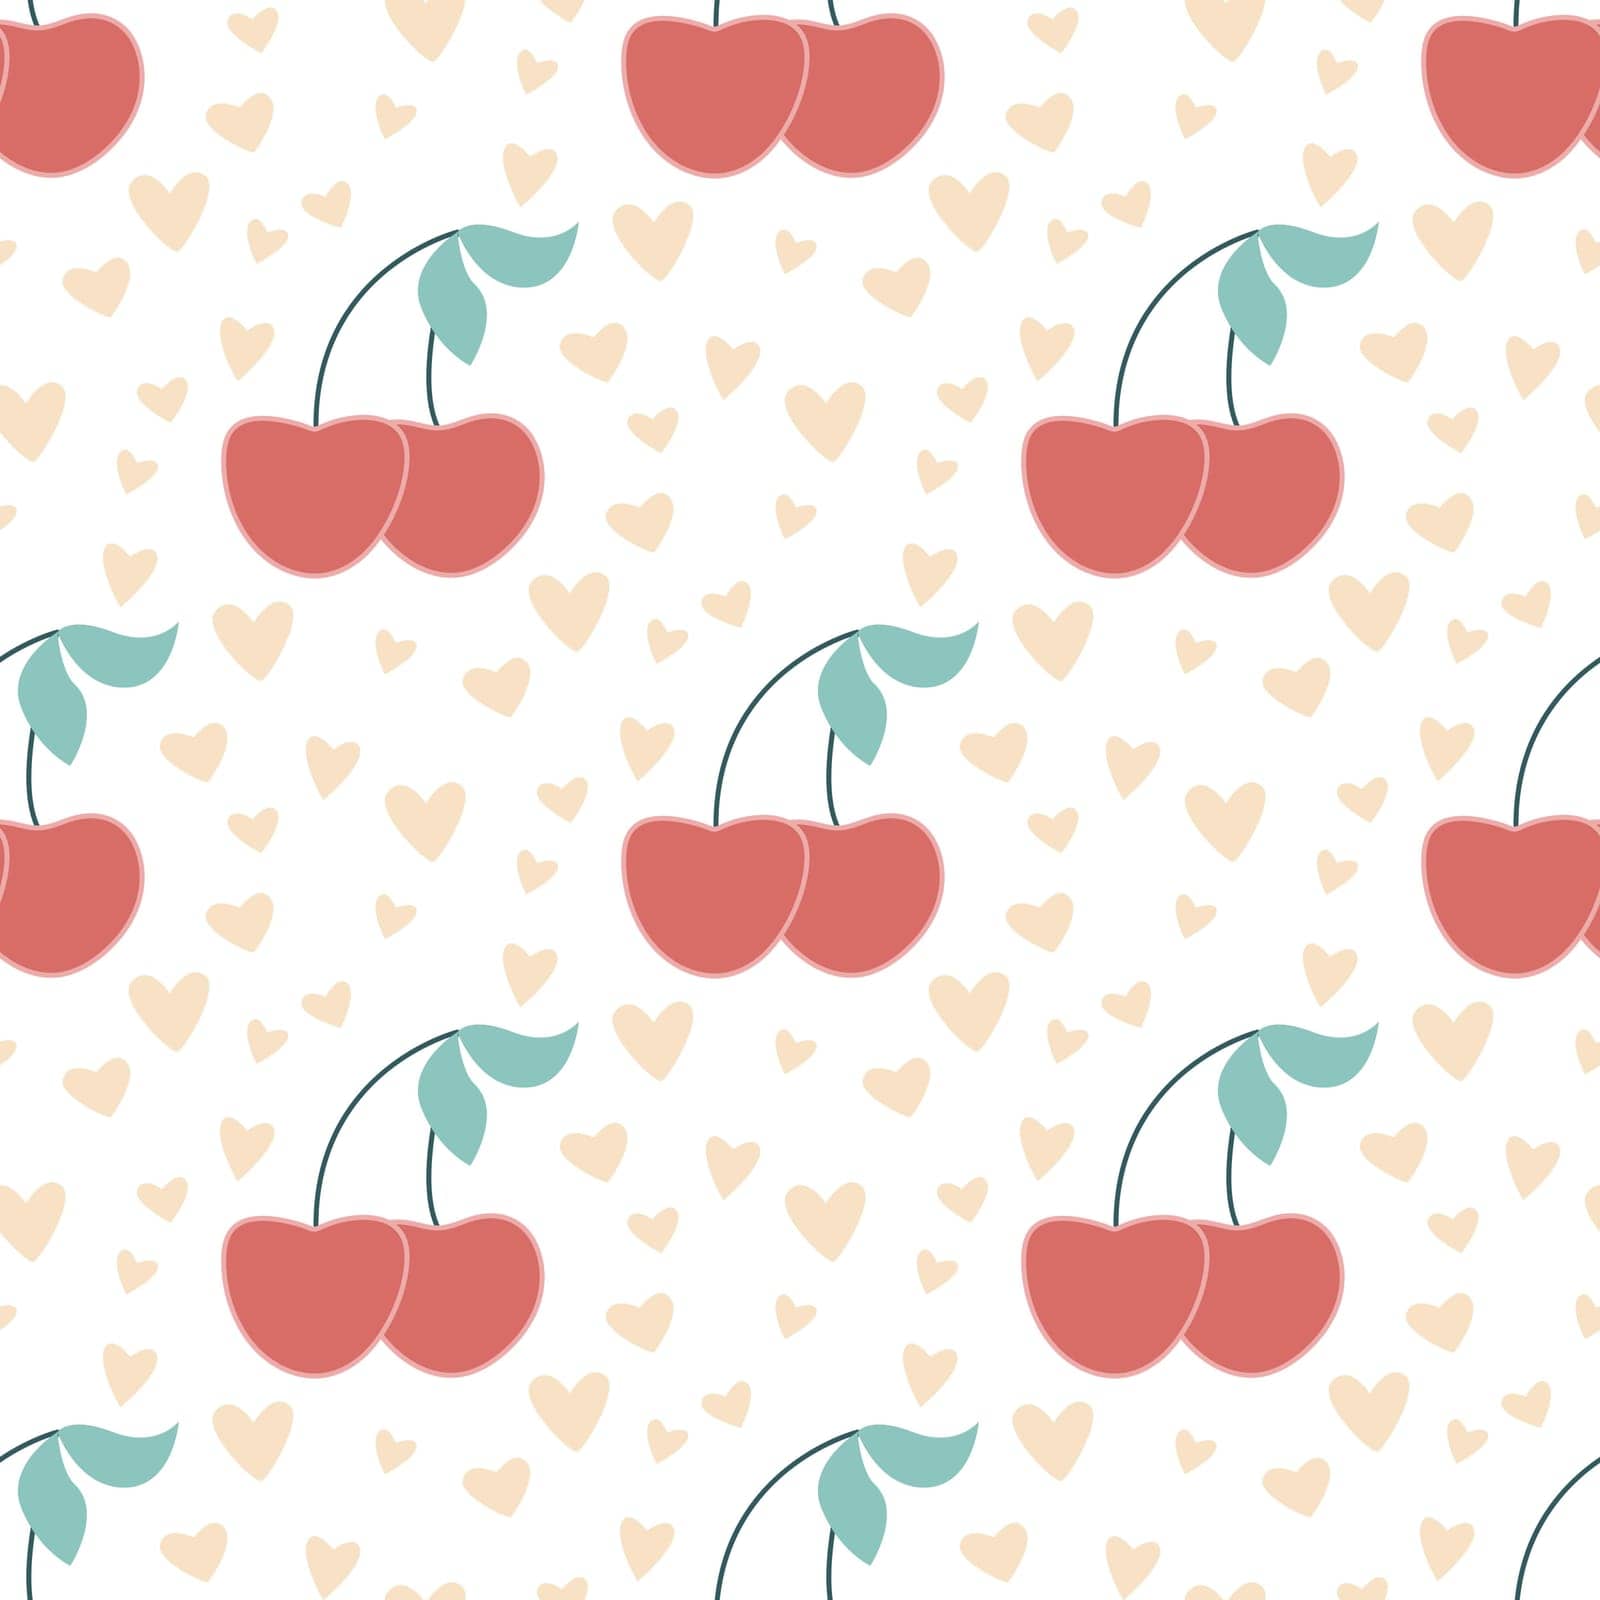 Cute seamless pattern of cherries and hearts by TassiaK